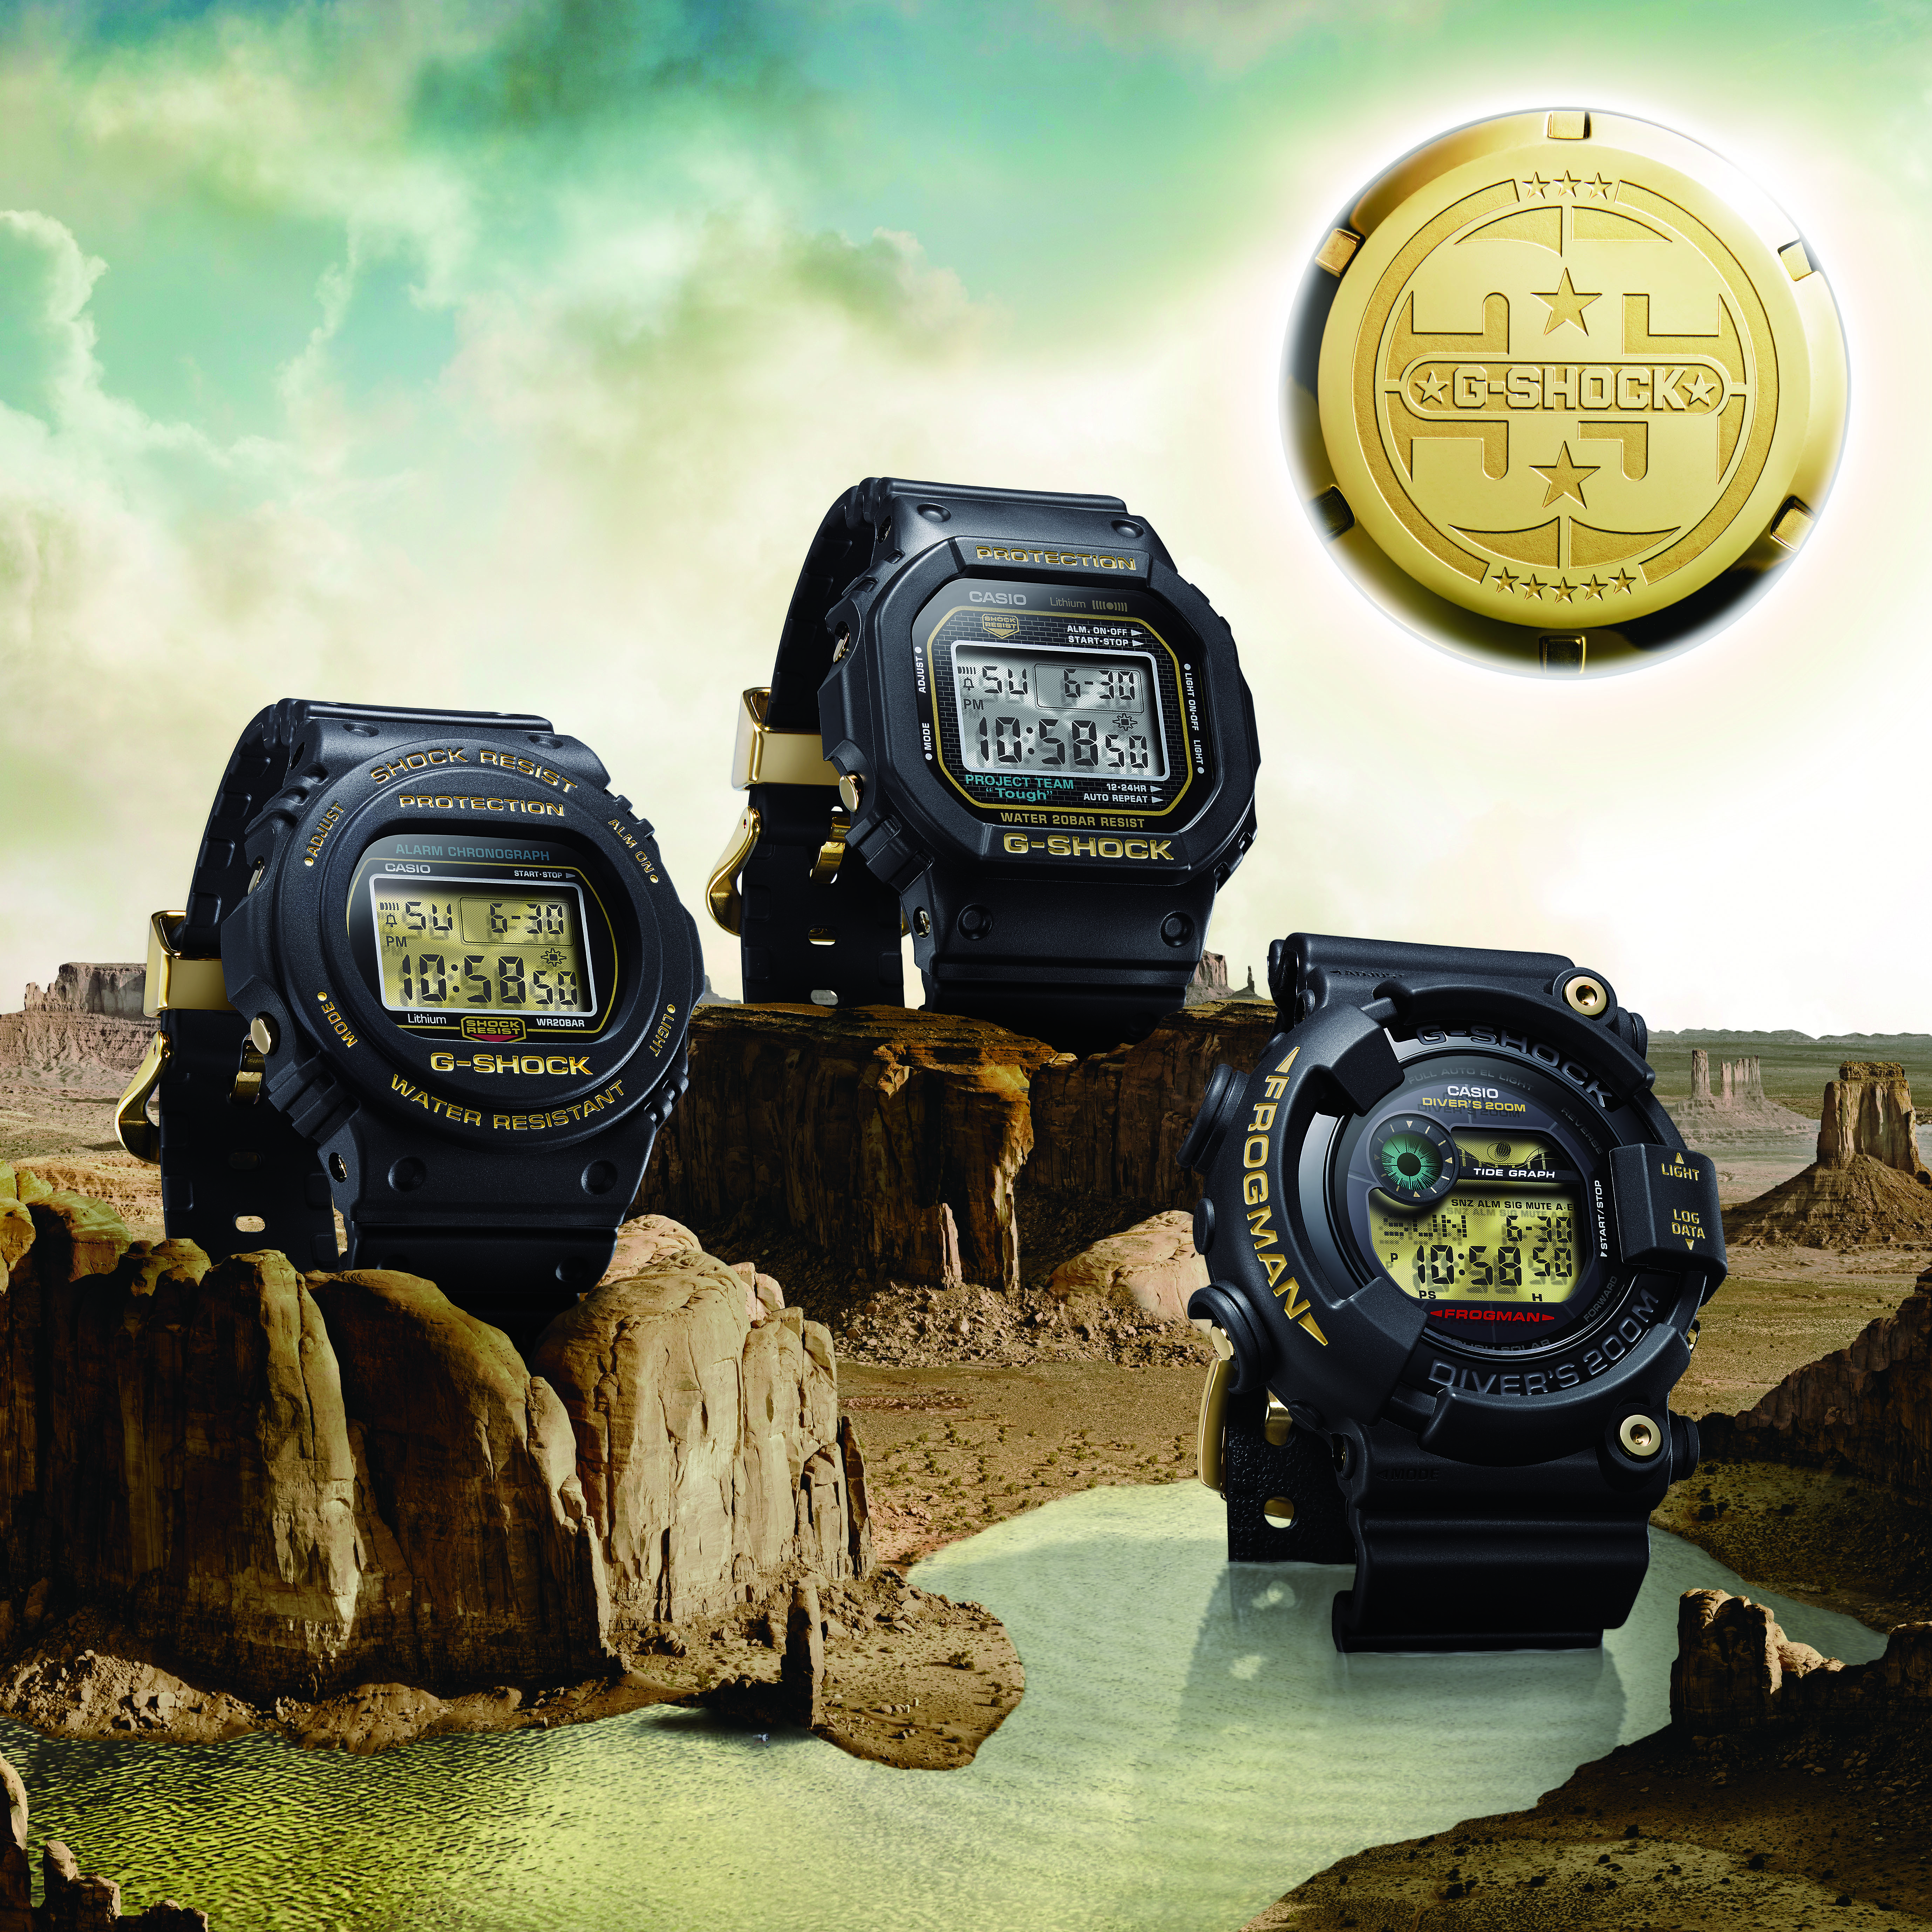 G-SHOCK Special 35th Anniversary Origin Gold Collection DW-5035D-1BJR, DW-5735D-1BJR, GF-8235D-1BJR will be released!!